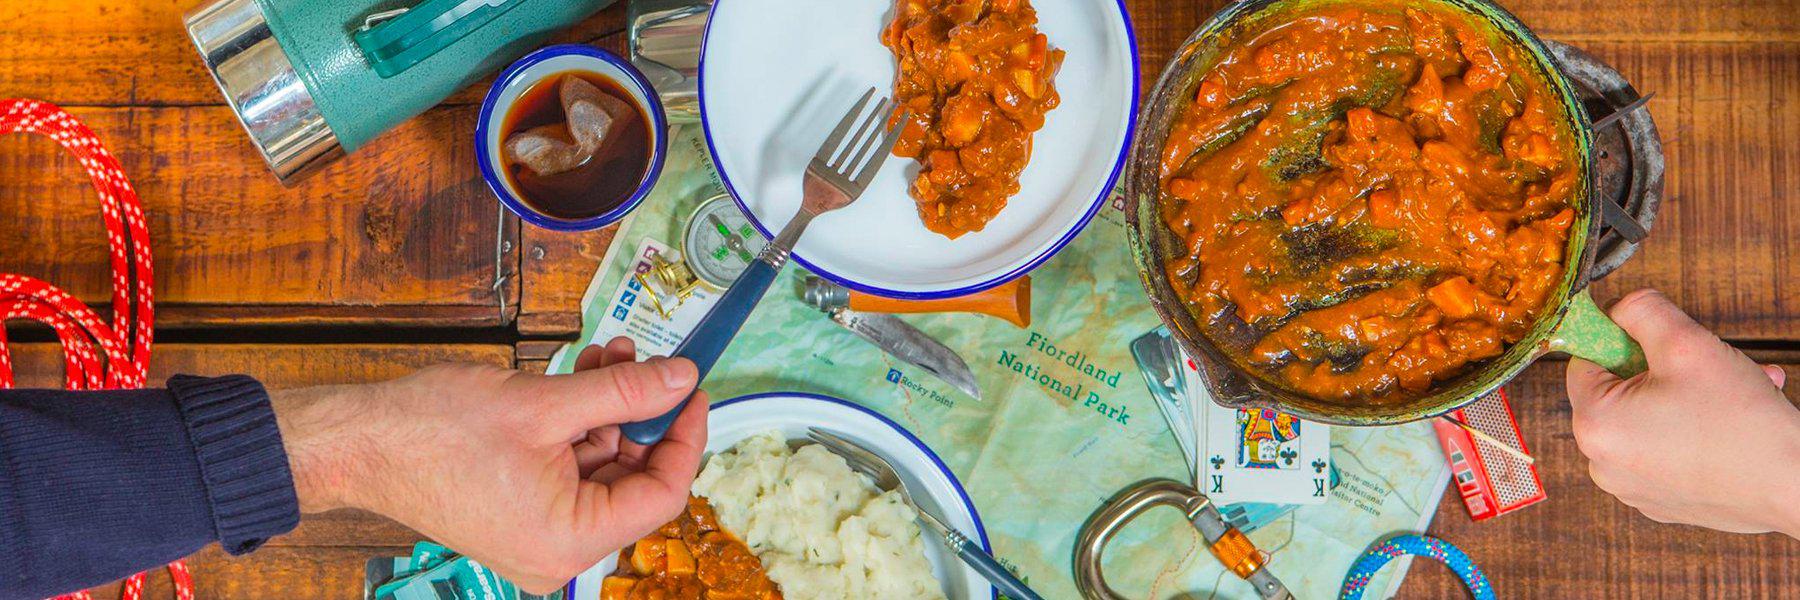 Go Native - Ready To Eat Meals online at Outdoor Action NZ